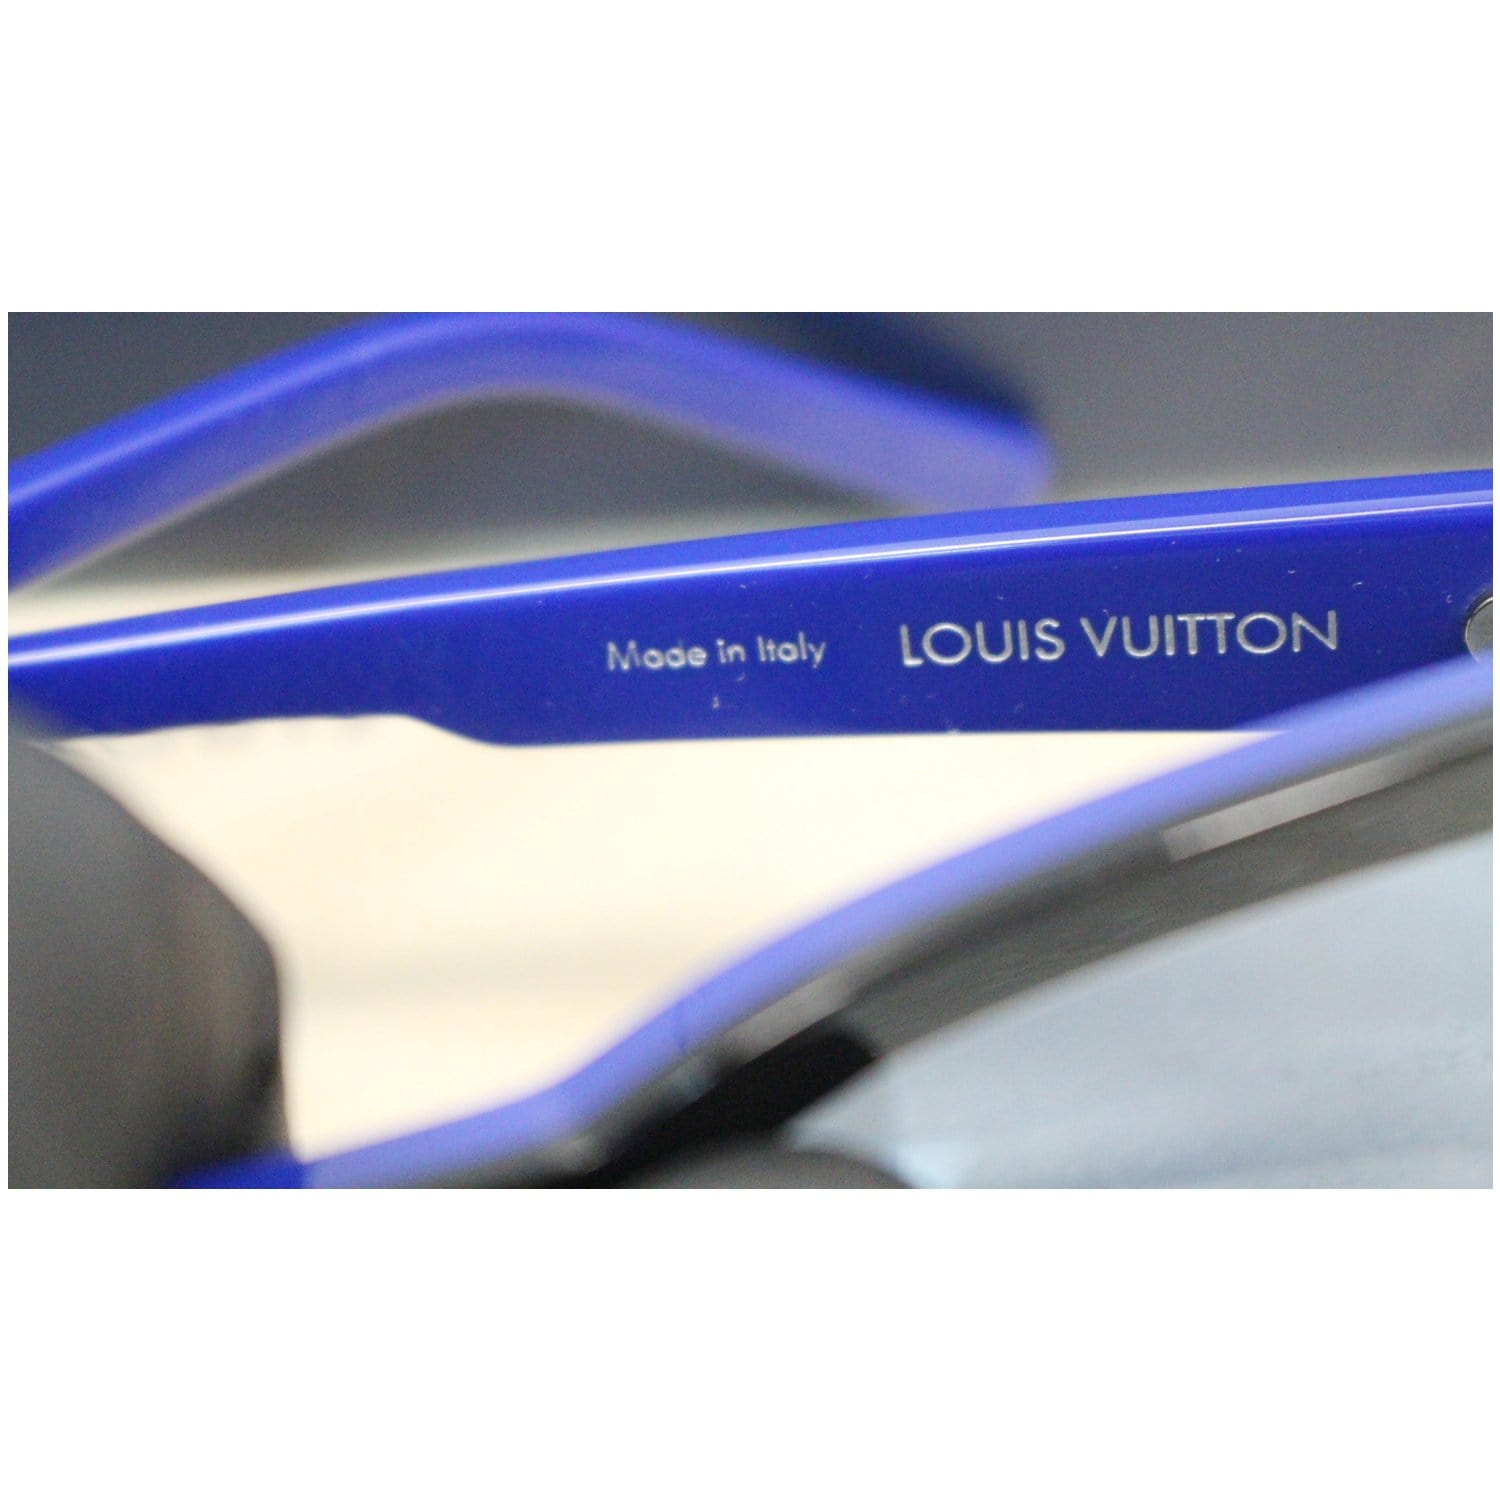 Louis Vuitton Outerspace Sunglasses in Black for Men